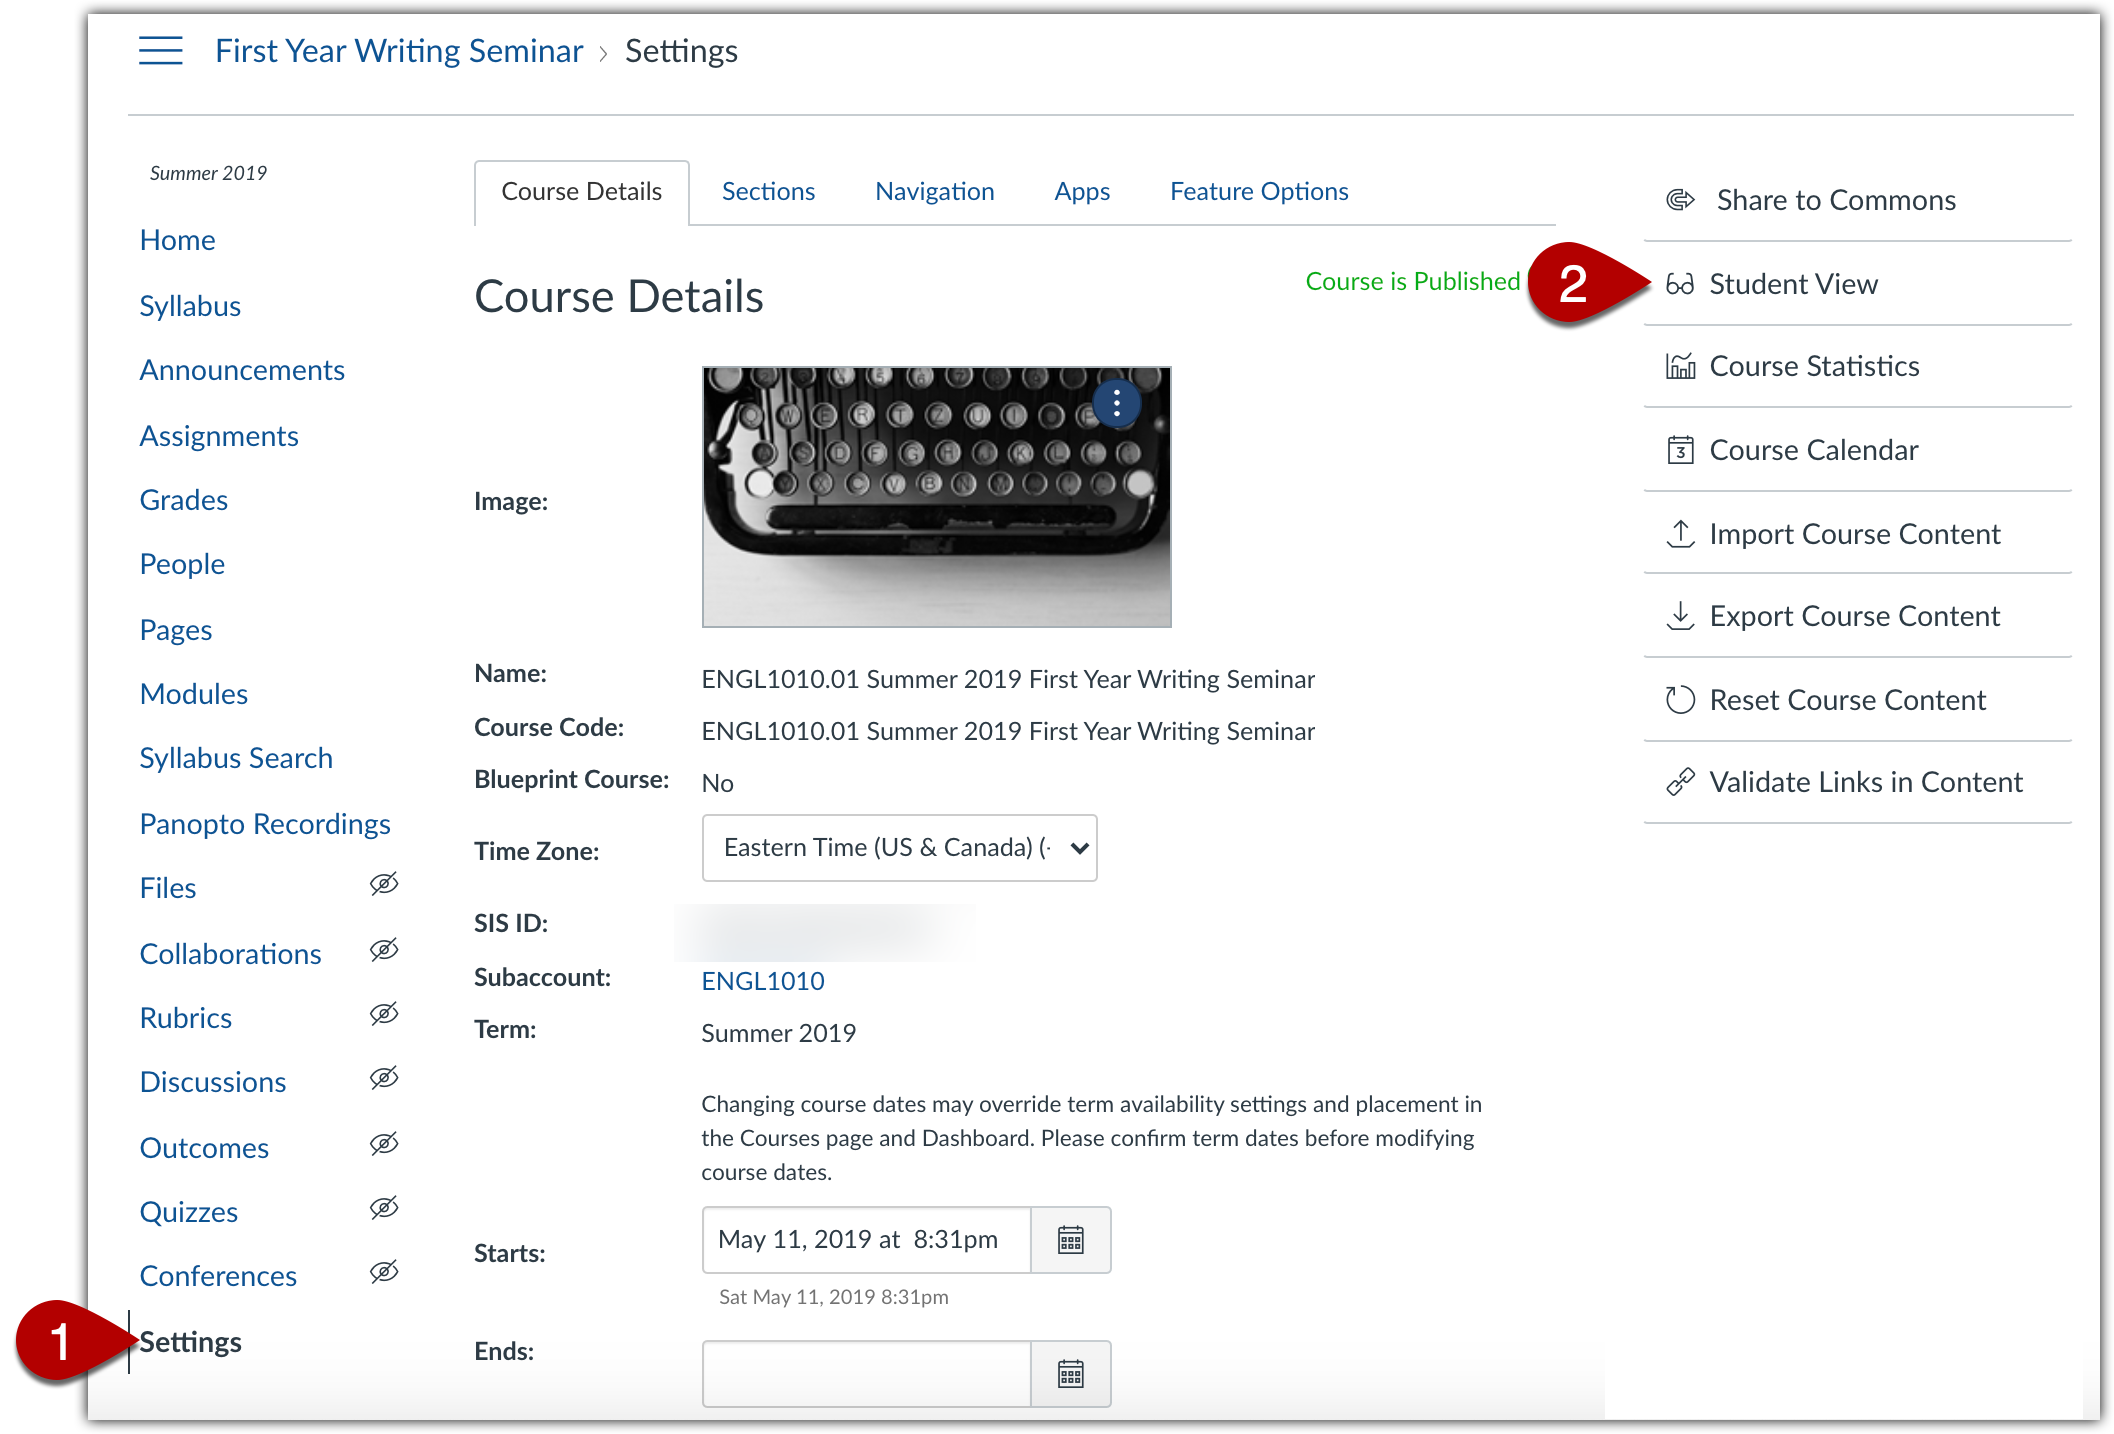 Canvas settings page and "Student View" link